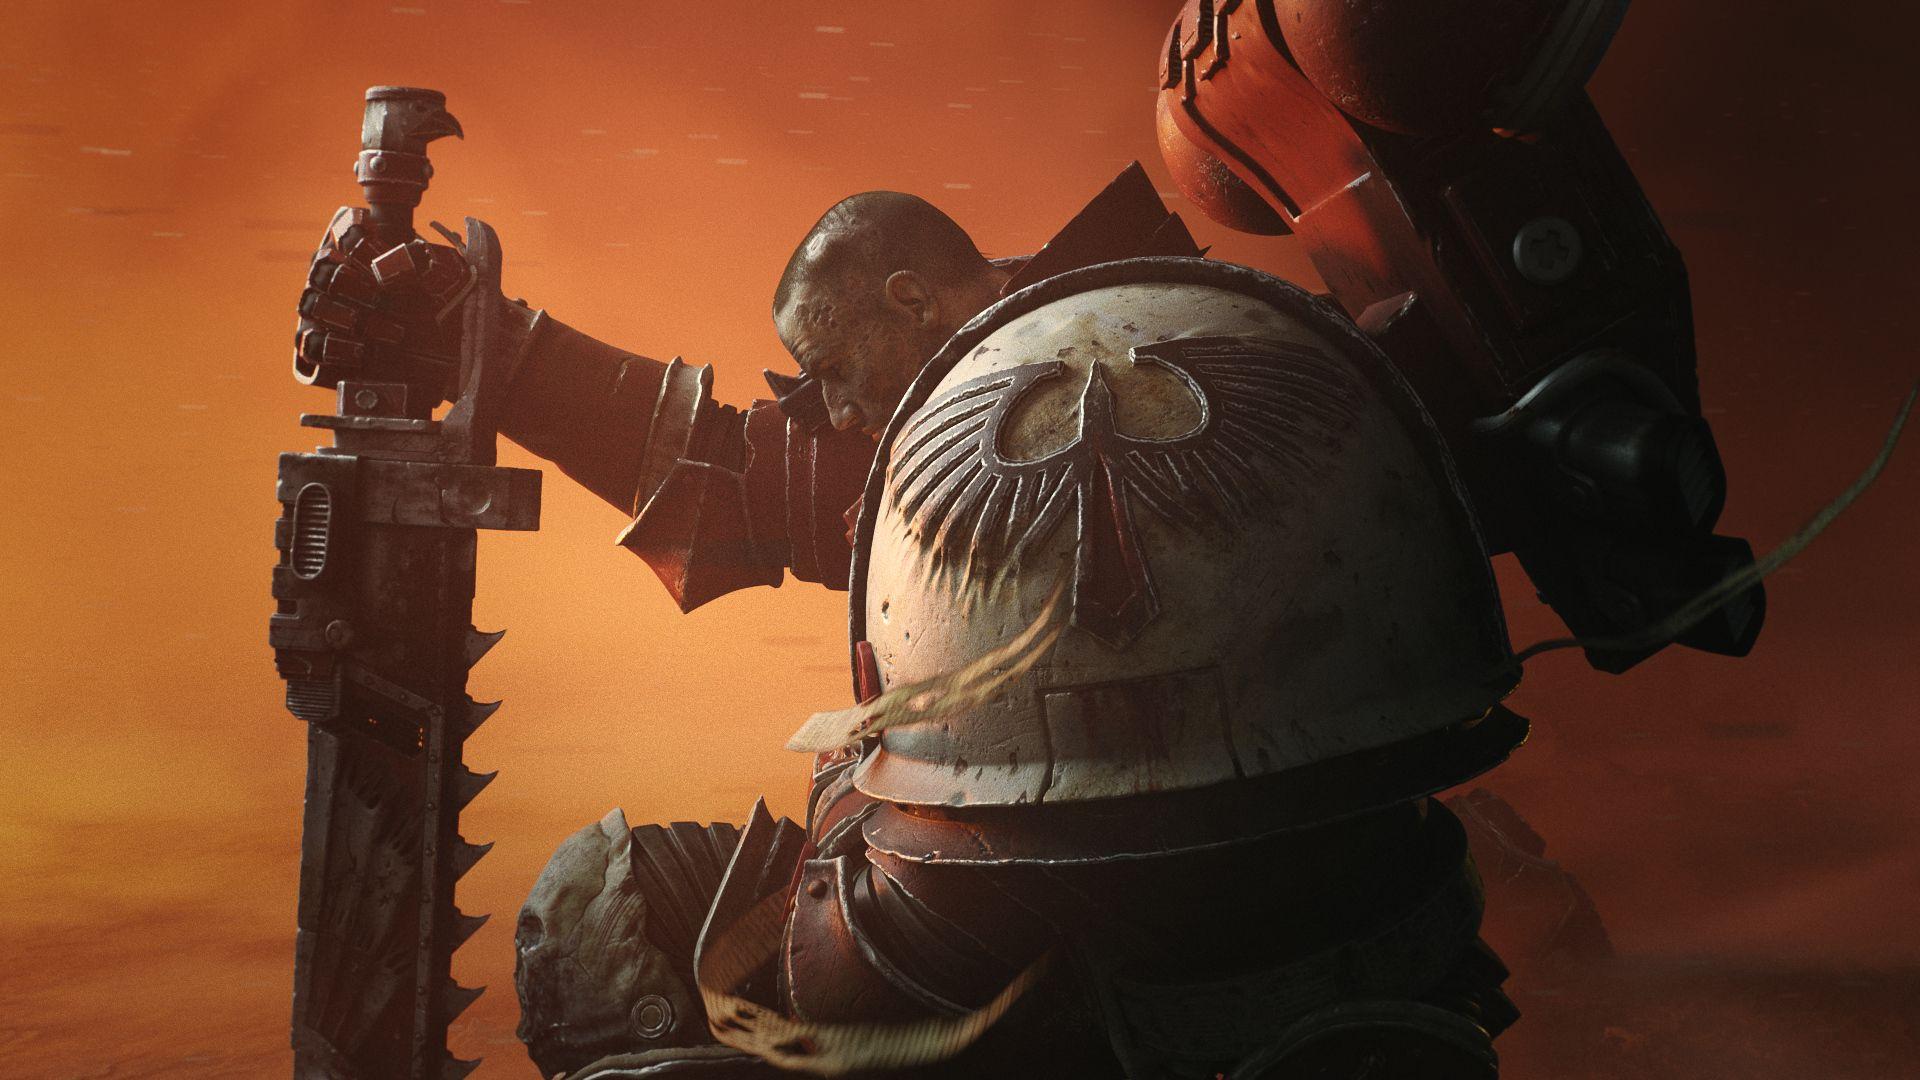 Sweet Dawn of War 3 cinematic stills are just begging to be